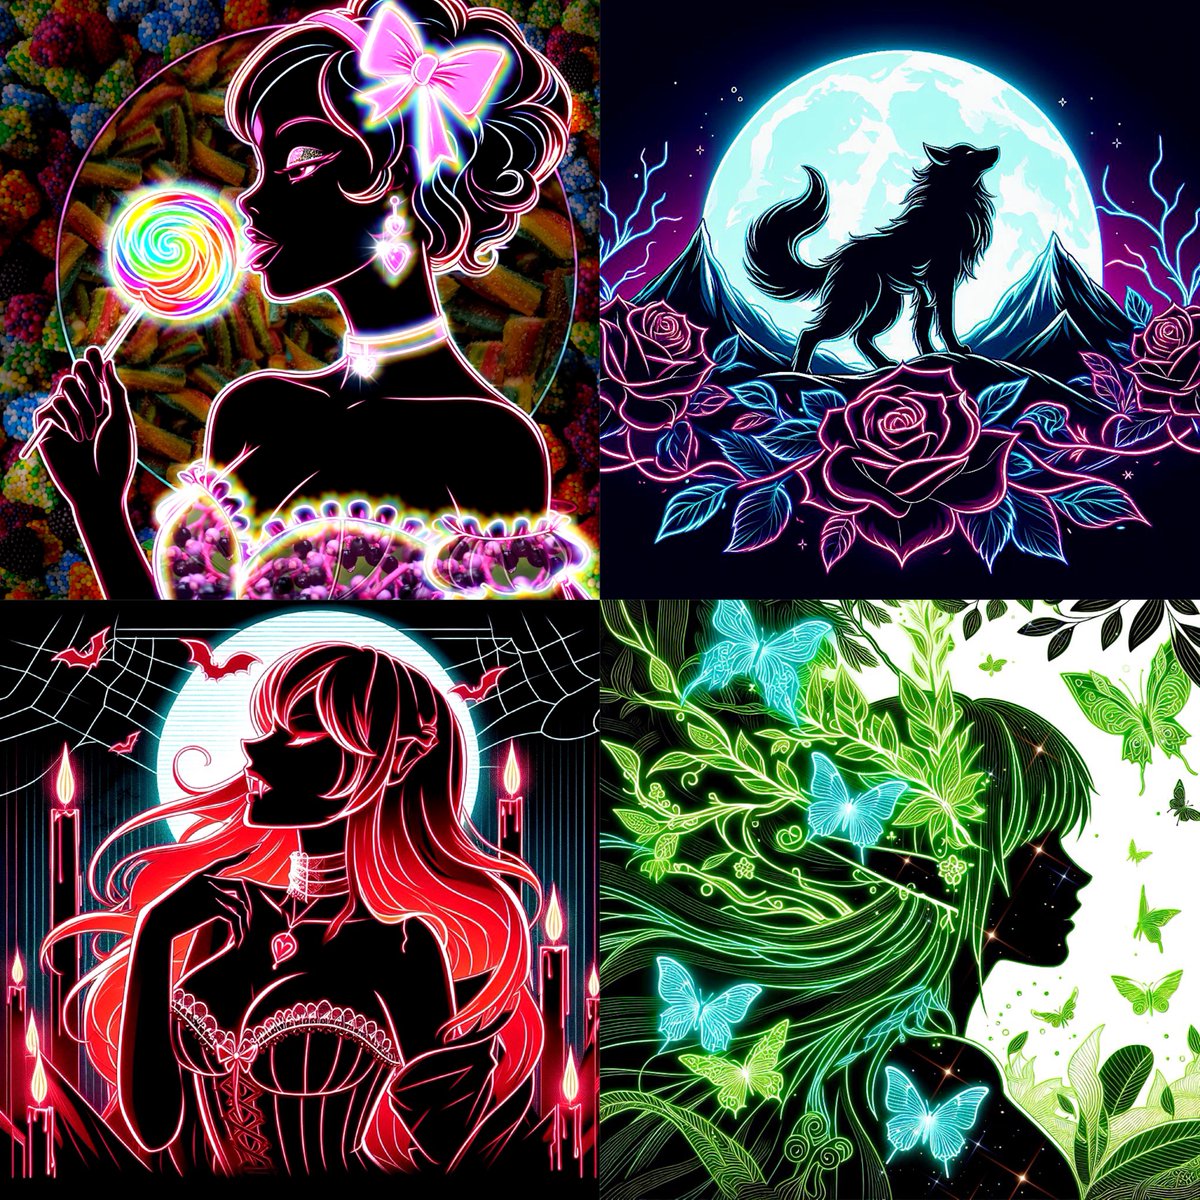 @Dornartz Hello dear✨

“Glowing Shadows” collection ✨

1.Candy shop (Collaboration with @libertyvisions_  )
❣️6/8, 8 $XTZ

2.A lonely wolf
❣️4/6, 3.5 $XTZ

3.Deadly charm
❣️4/6, 3.5 $XTZ

4.The Elf’s Grace
❣️4/5, 4 $XTZ

objkt.com/collections/KT…